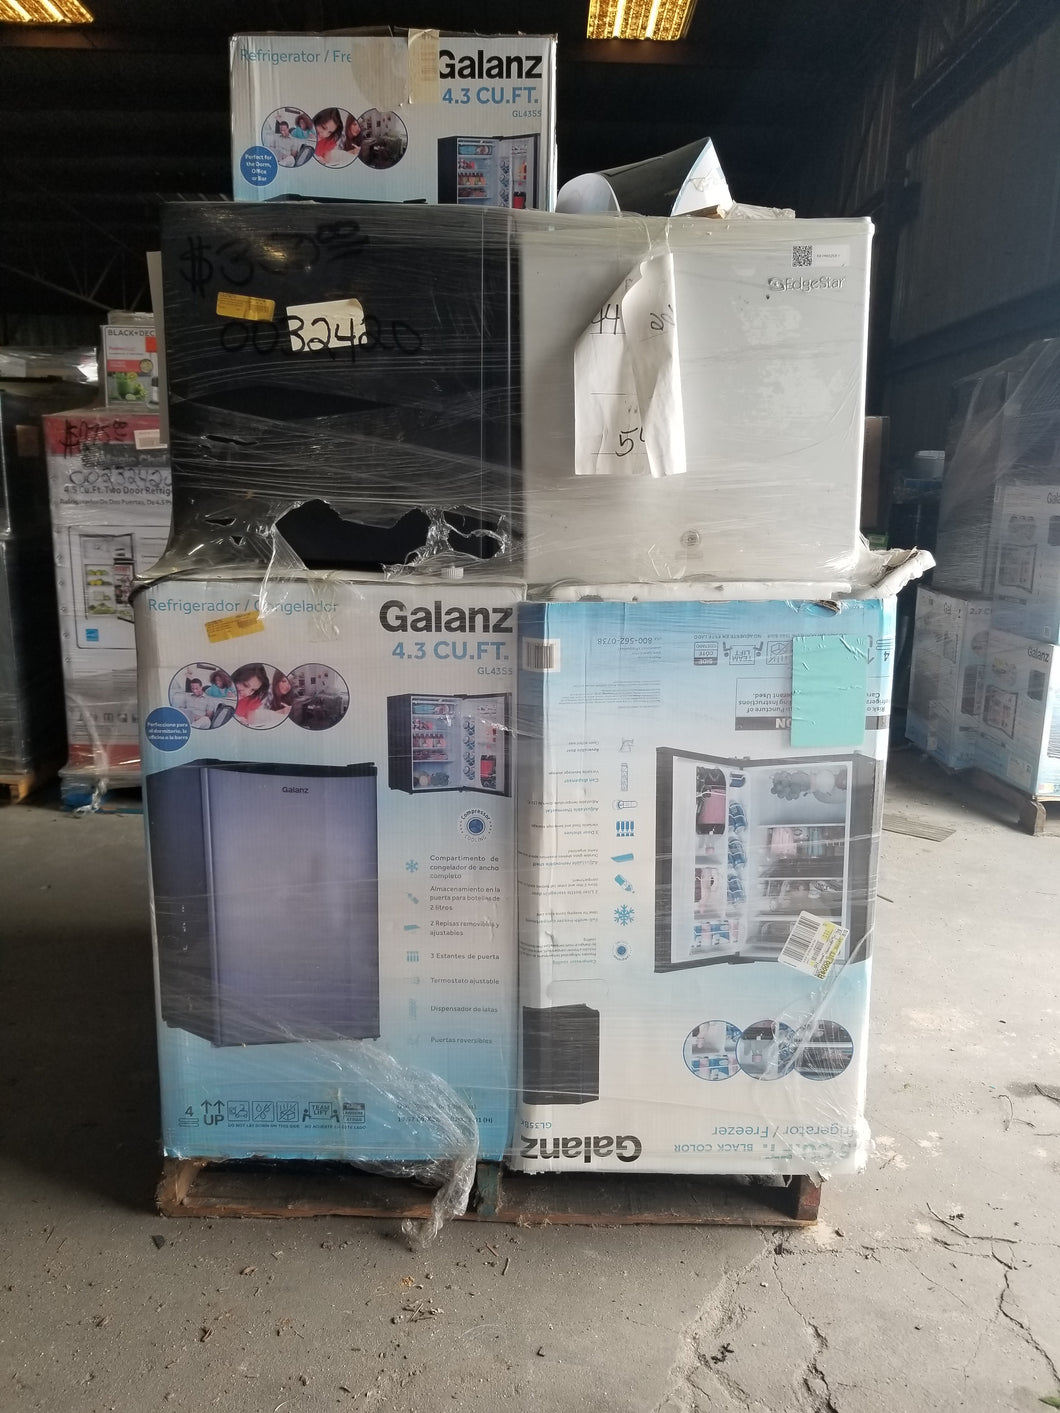 Wal-Mart Mid Size Appliance Pallet - 0032420